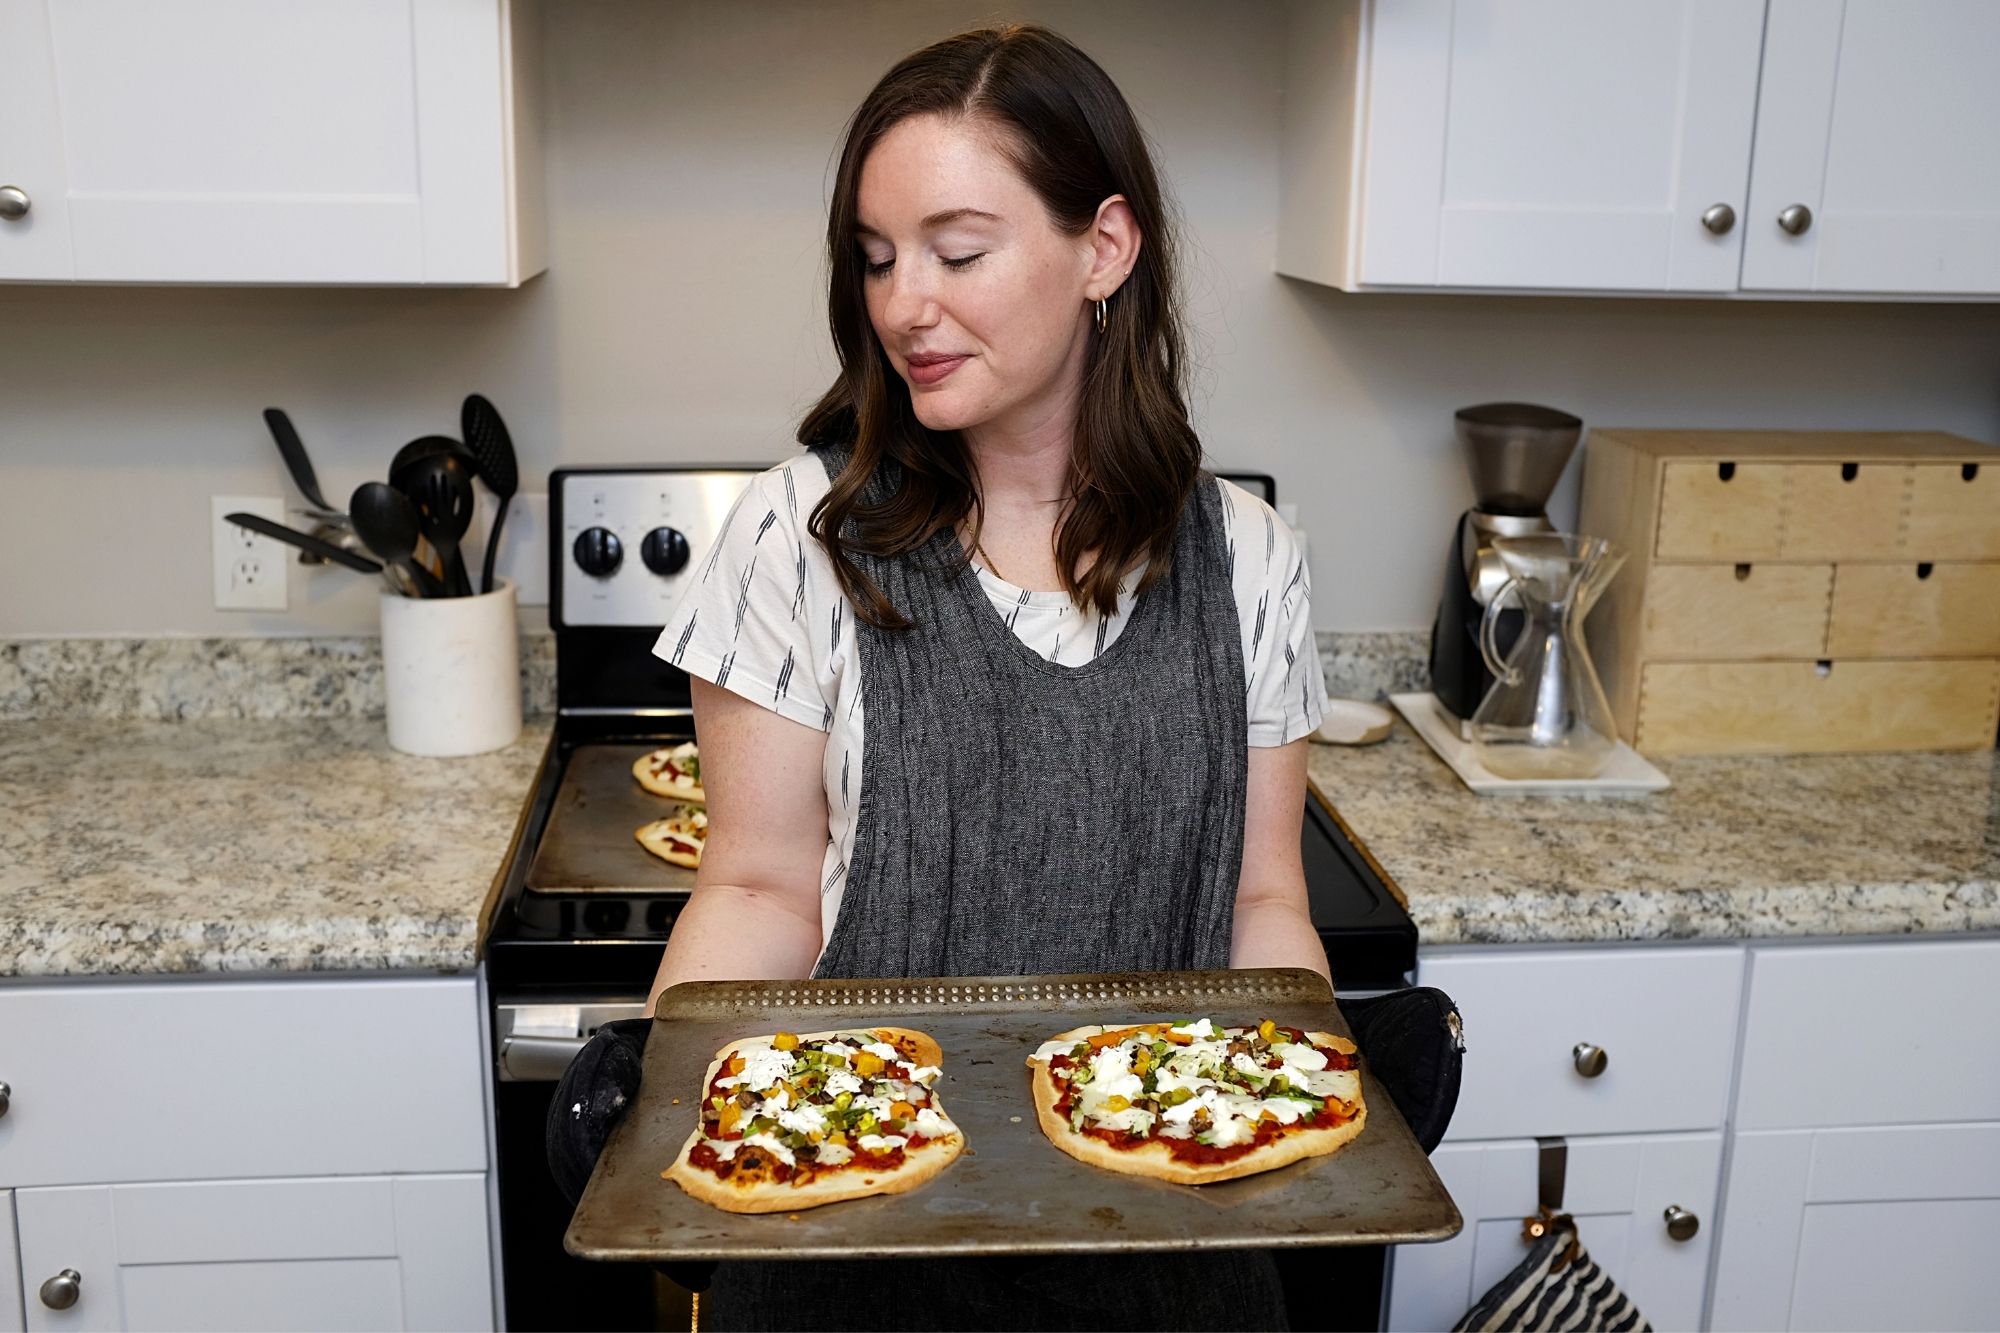 Alyssa holds a try with two finished pizzas